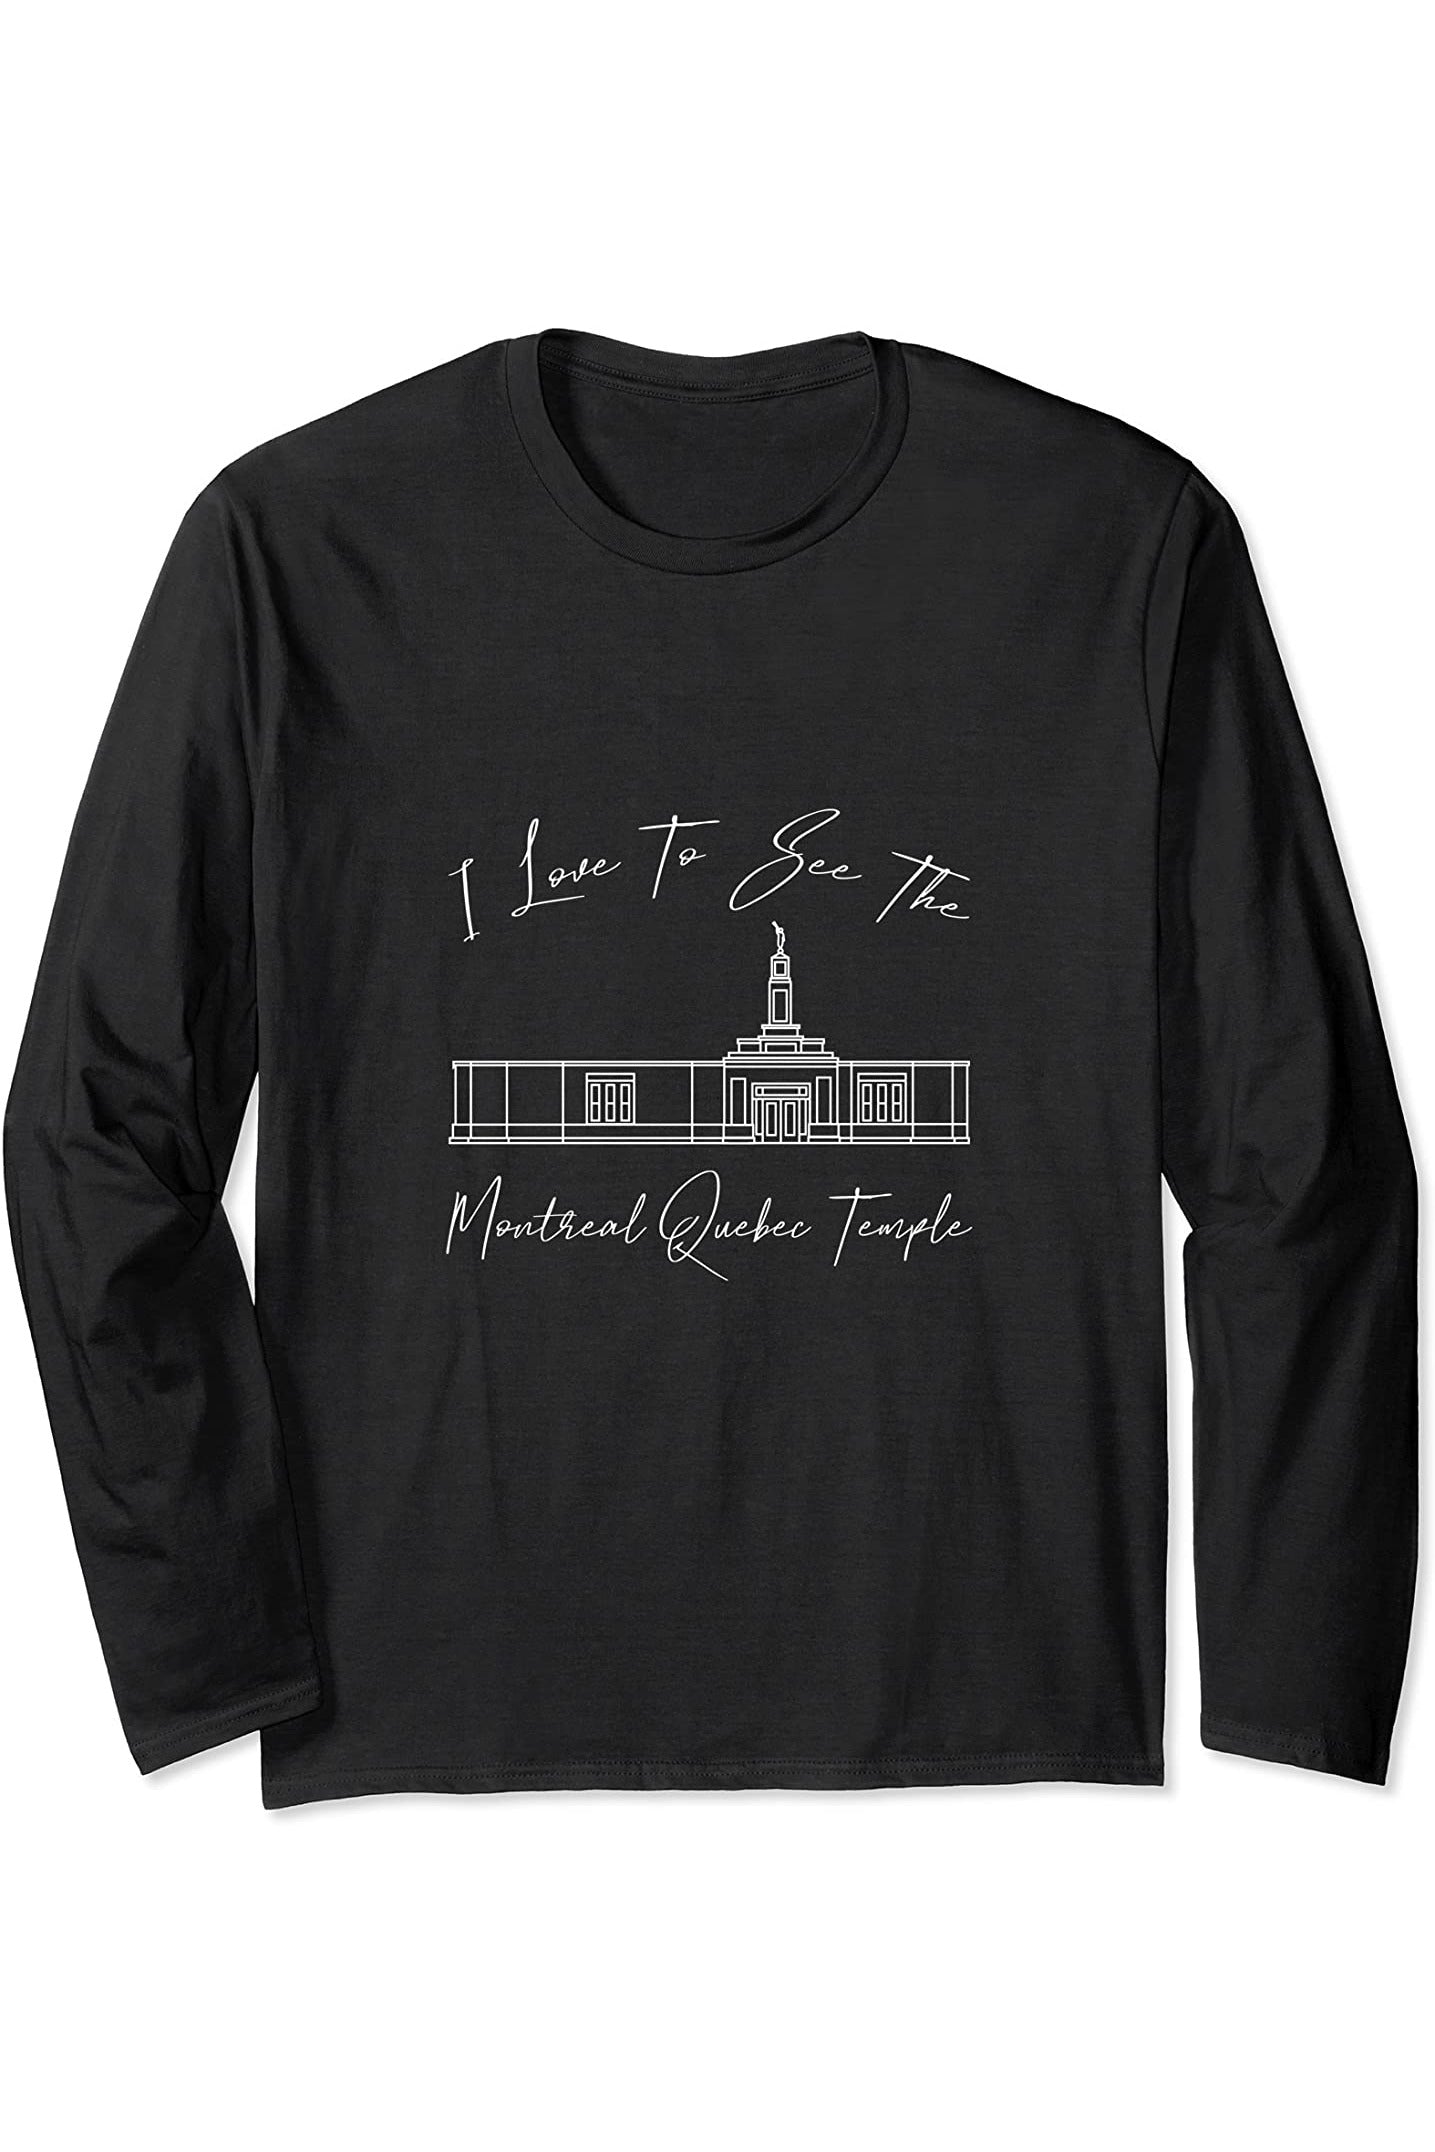 Montreal Quebec Temple Long Sleeve T-Shirt - Calligraphy Style (English) US